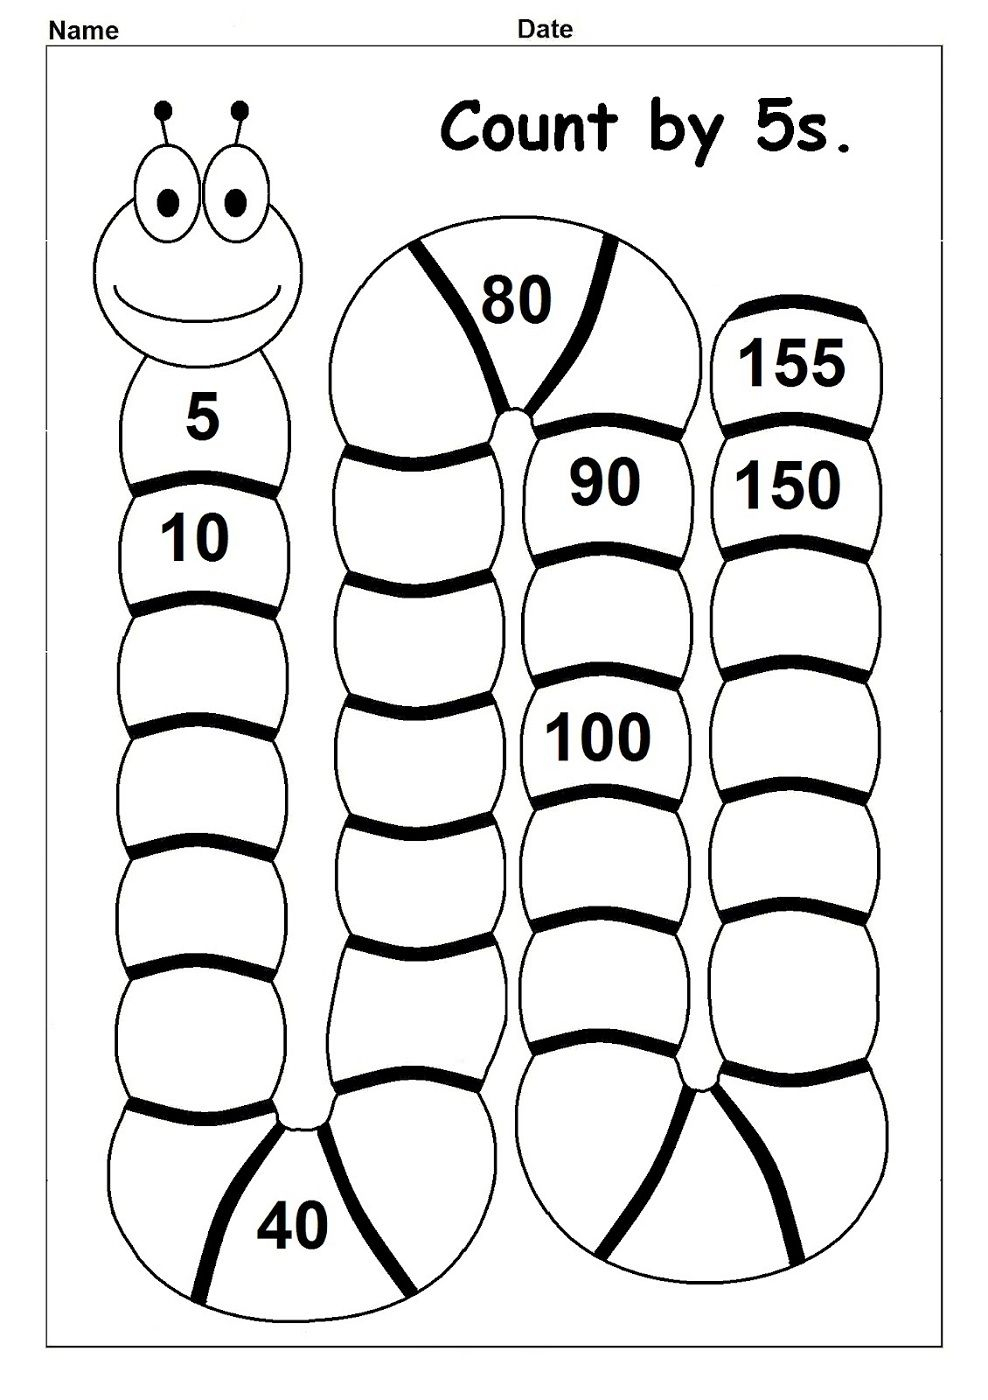 Skip Count By 5 Worksheet That You Can Save And Print For Free To Help